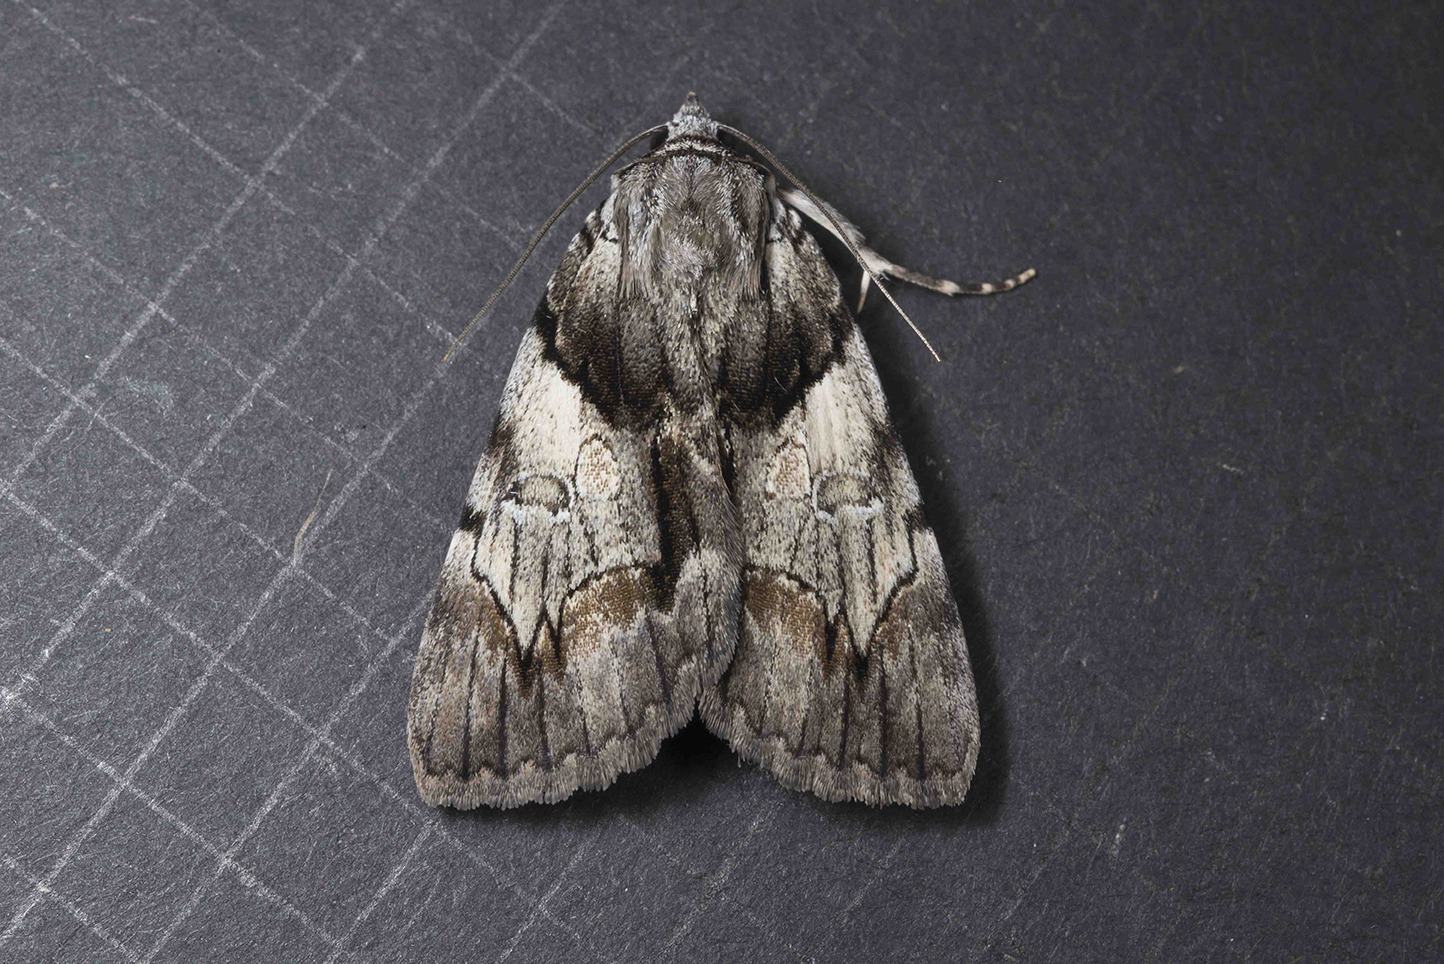 The Nocturnal Nuance of Moths